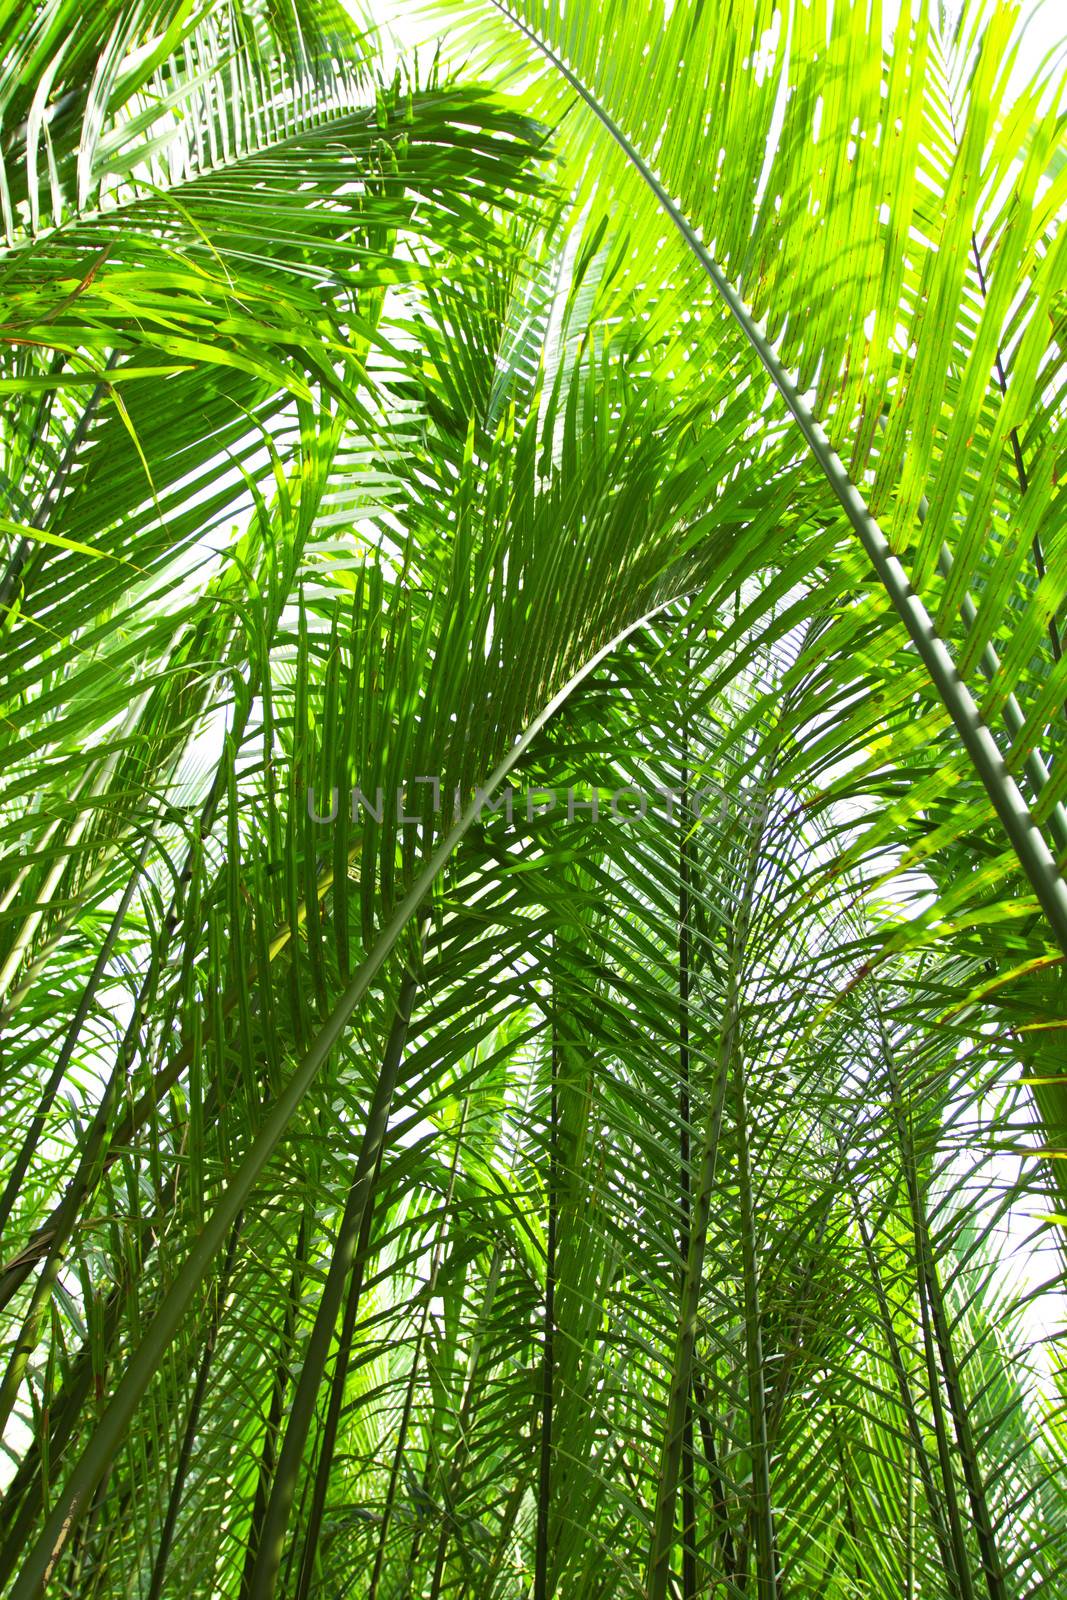 Nypa palm, and nypa palm leave can use for roof cover.